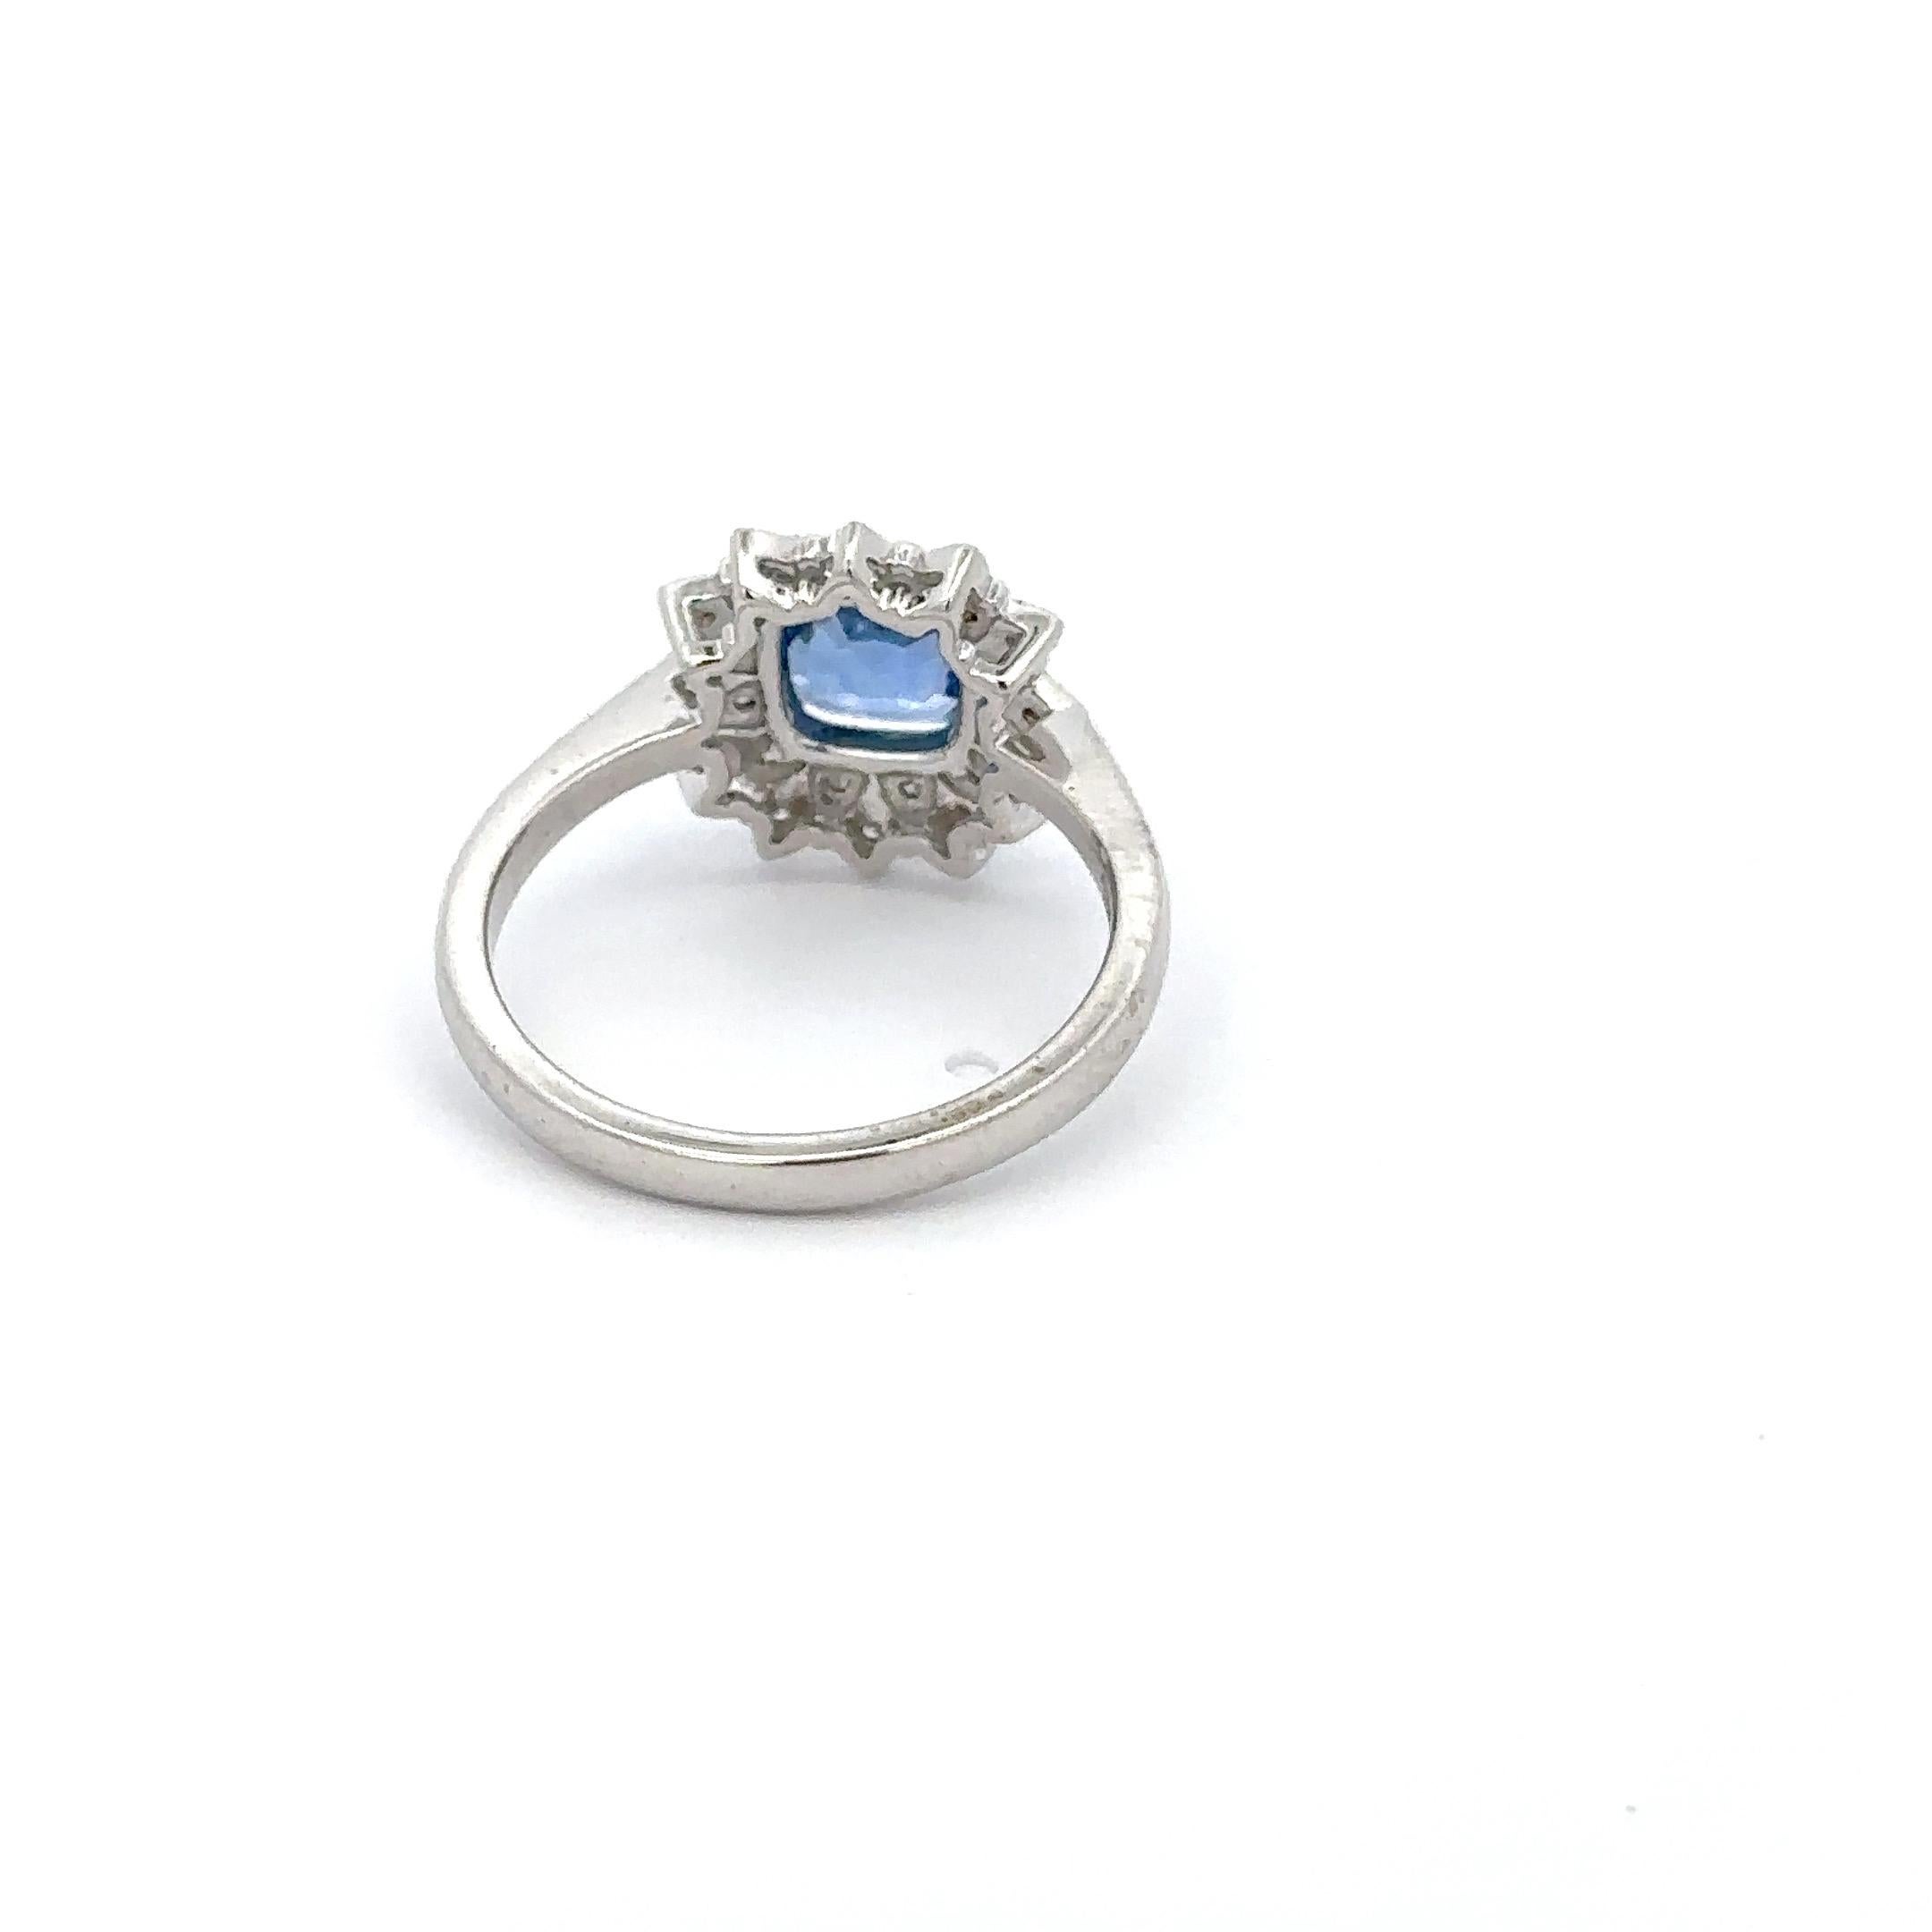 For Sale:  Genuine Blue Sapphire Halo Diamond Engagement Ring 18k Solid White Gold 5